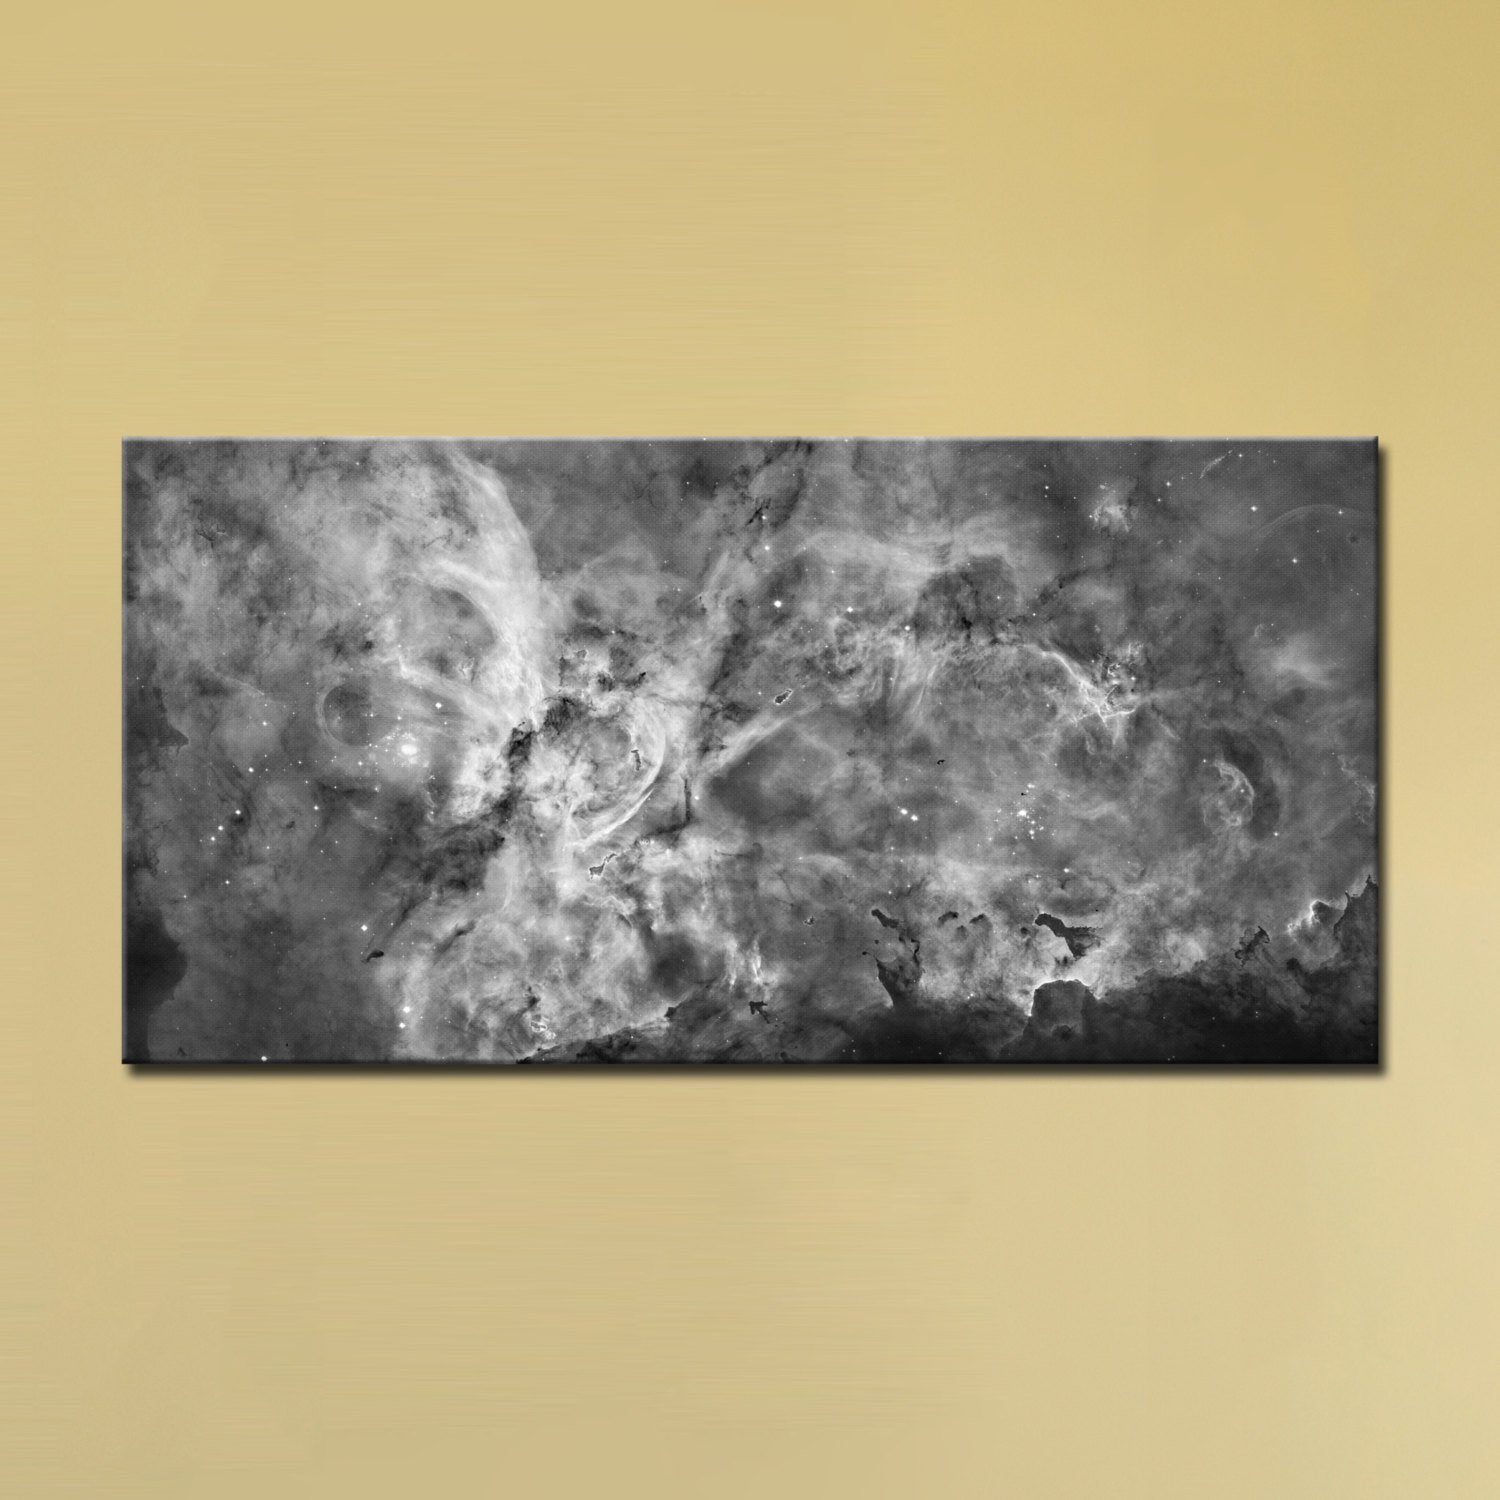 The Carina Nebula, Star Birth in the Extreme (Grayscale) (32" x 48") - Canvas Wrap Print